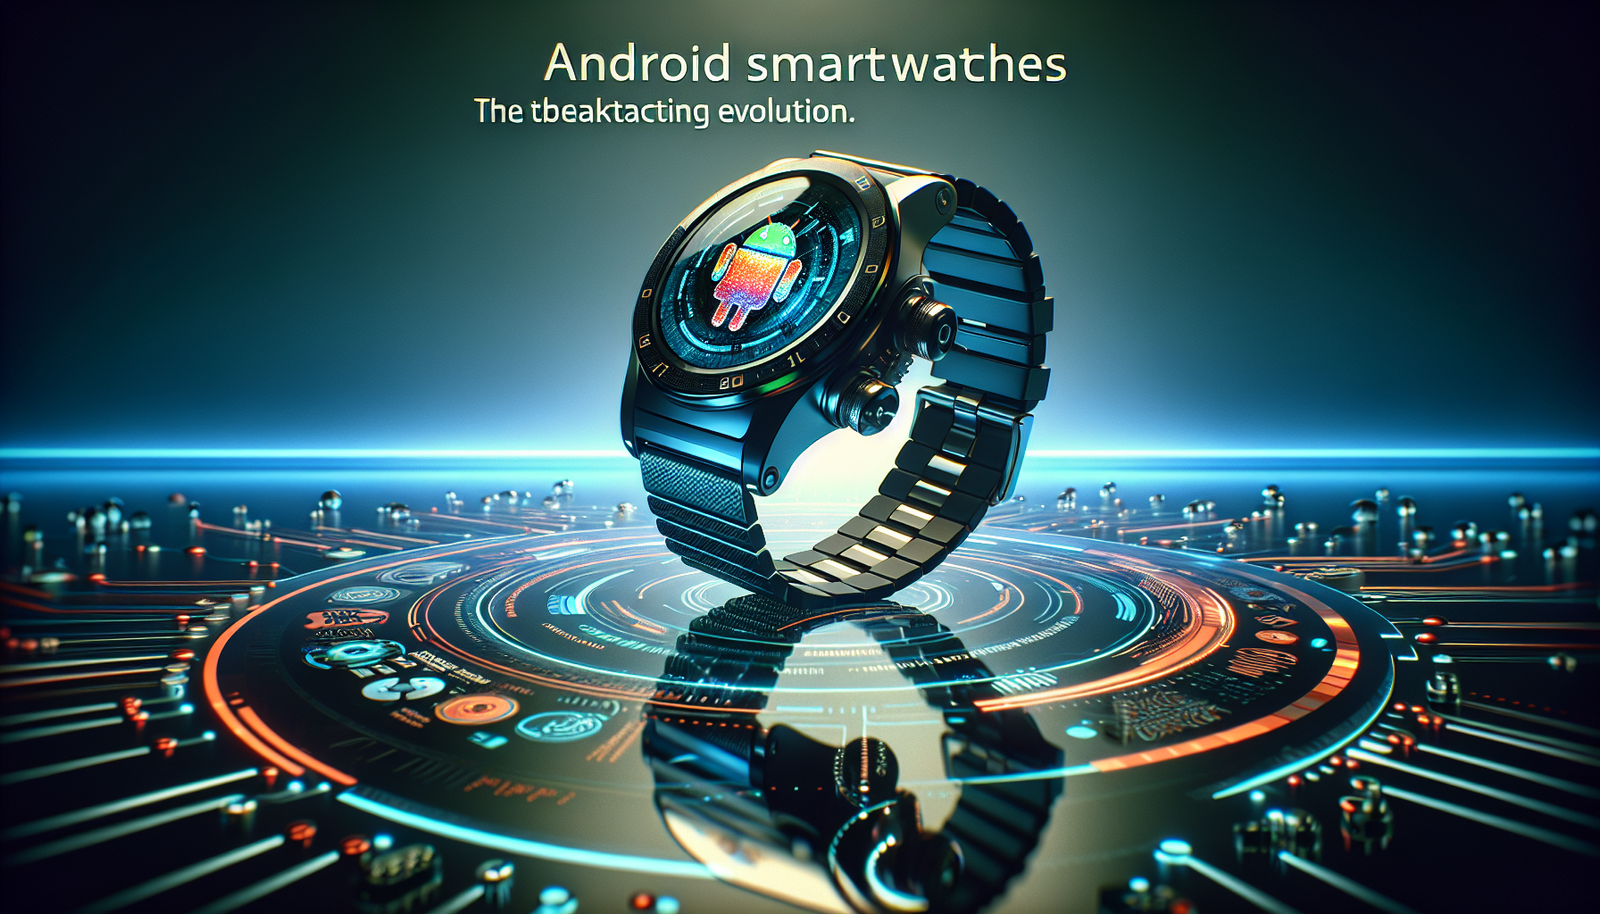 The Awesome Evolution of Android Smartwatches